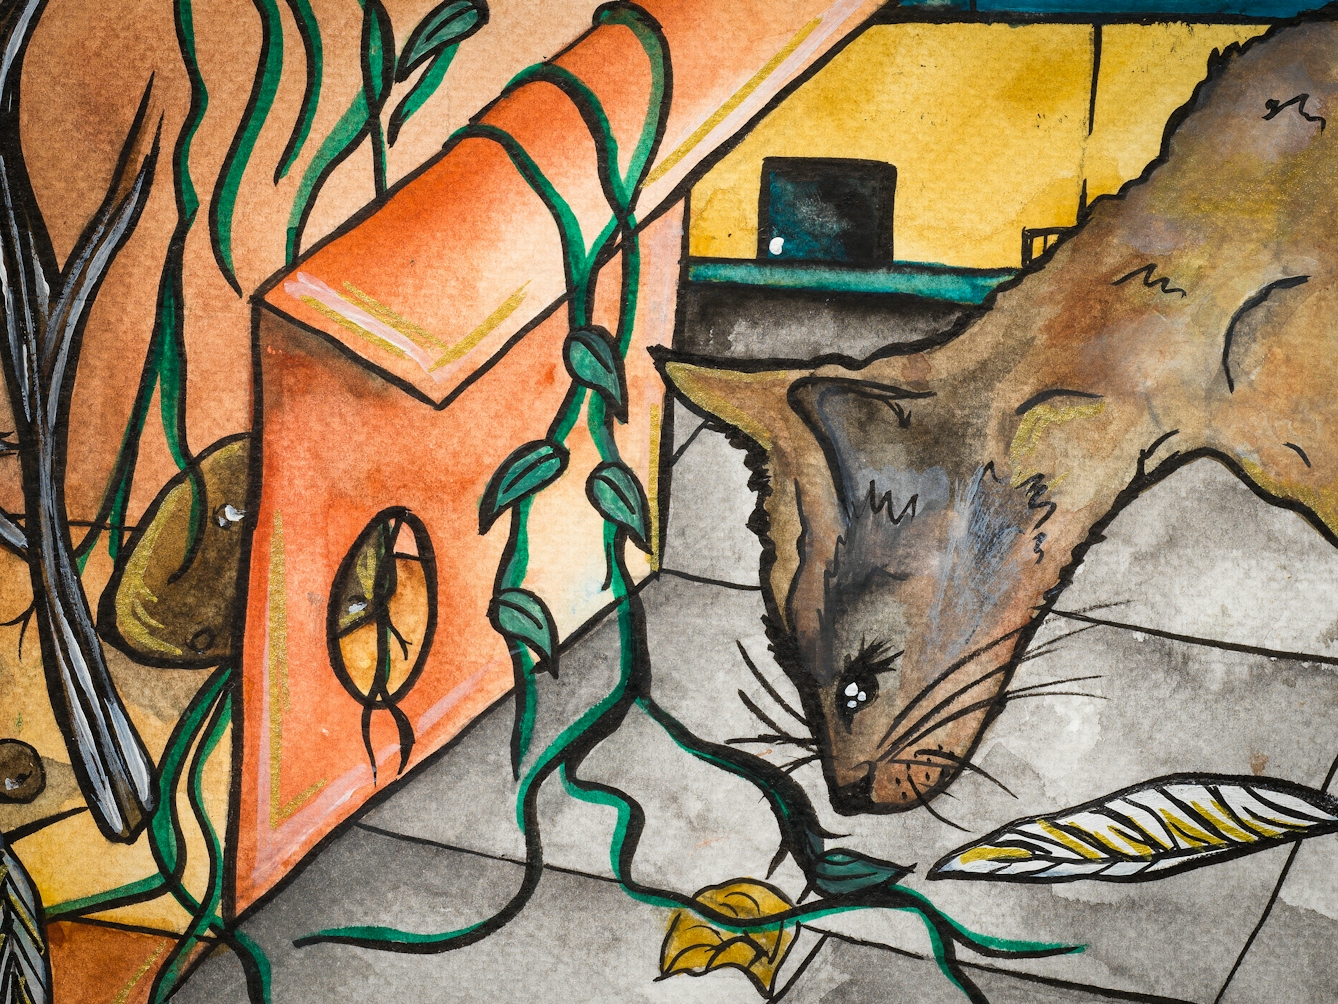 Detail from a larger colourful artwork. The artwork shows a flatpack box which is open on the front facing side, with several holes in it, on a tiled foor.  There are tree branches and vines growing up through the box and leaves covering the floor. A  brown cat's head can be seen on the right side of the frame, bending towards a vine.